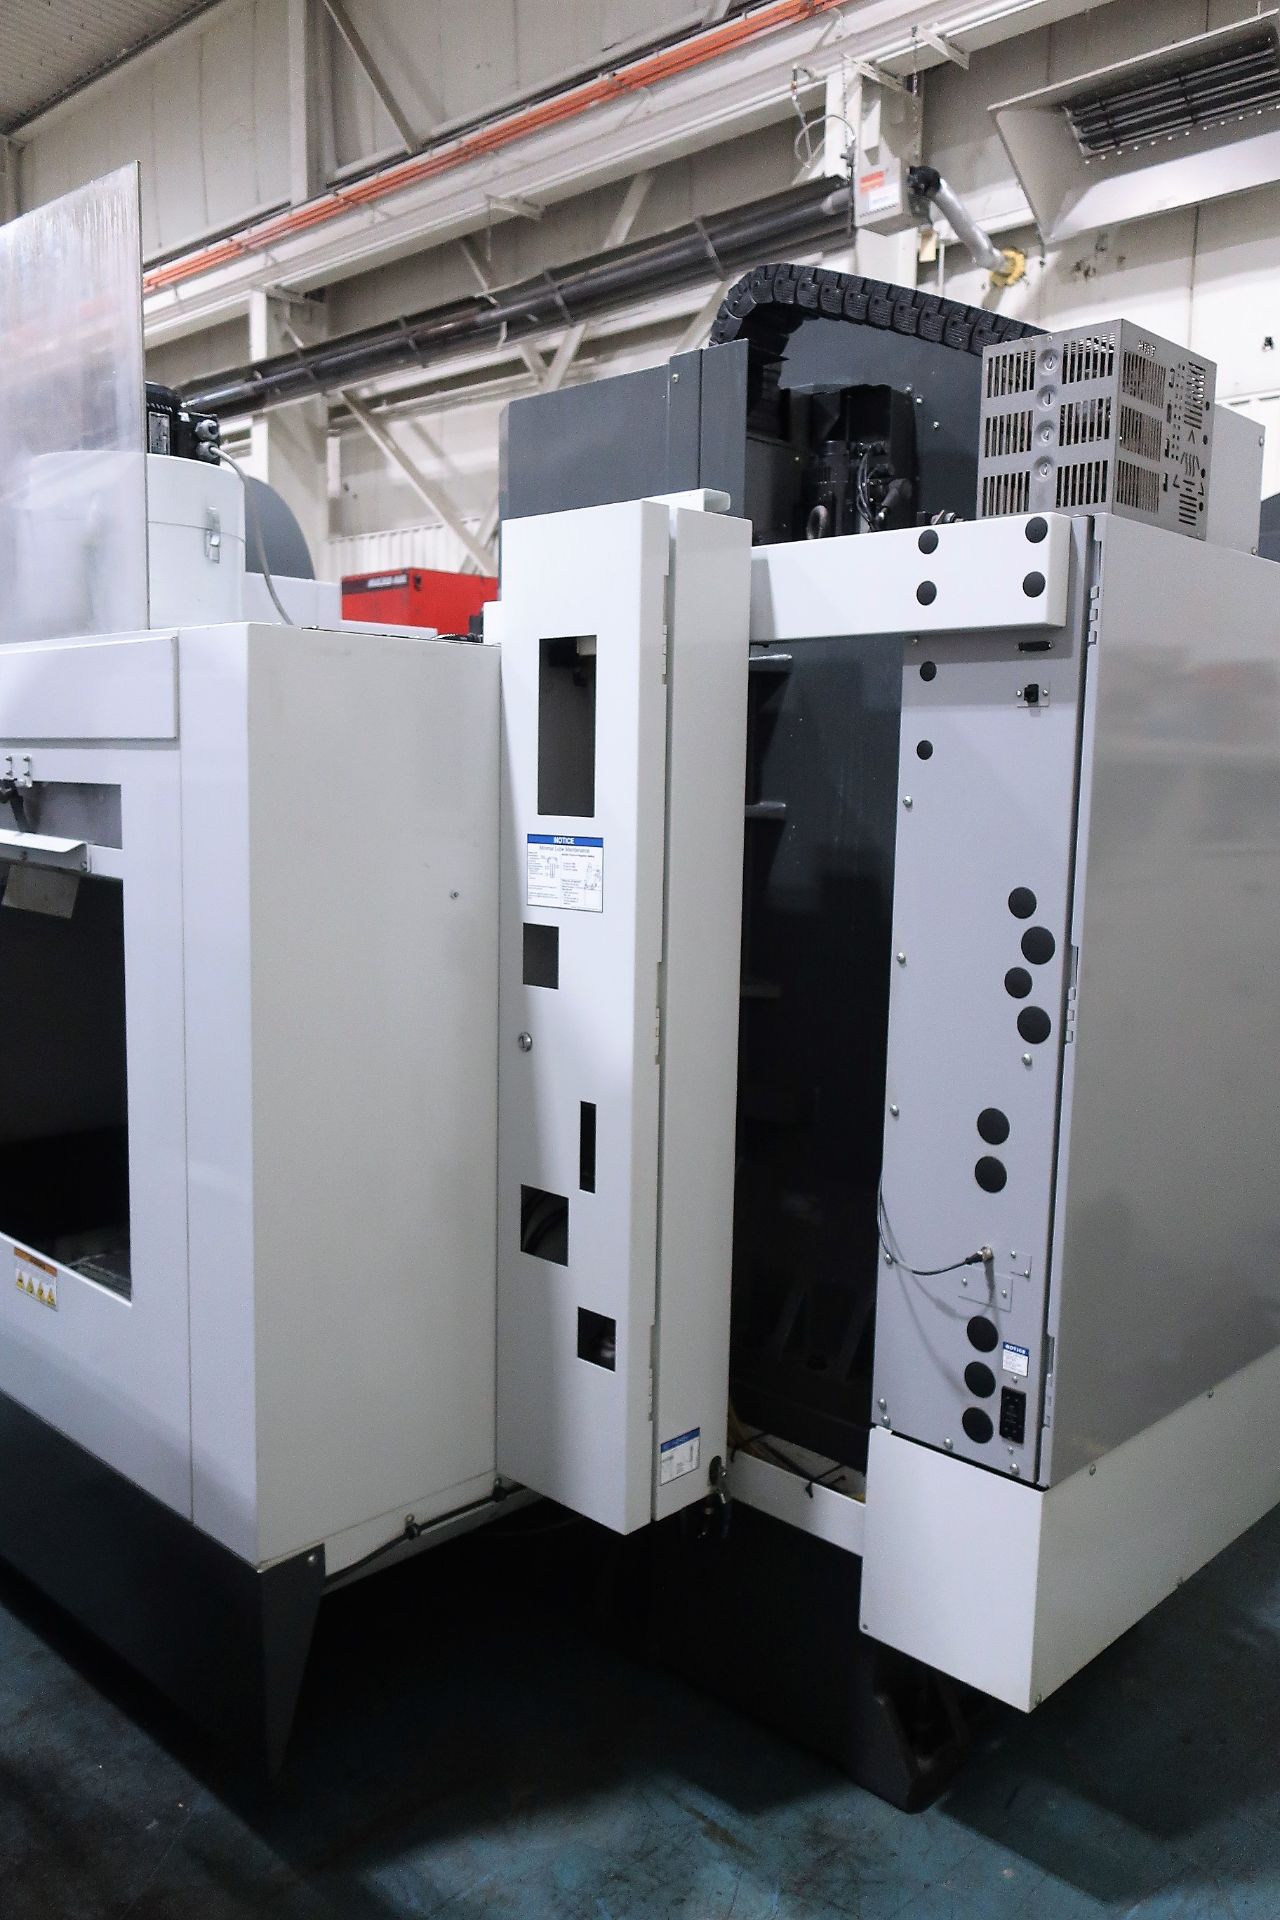 HAAS VF2-YT CNC 3-AXIS VERTICAL MACHINING CENTER, 15K RPM SPINDLE, S/N 1082158, NEW 2010 - Image 6 of 9